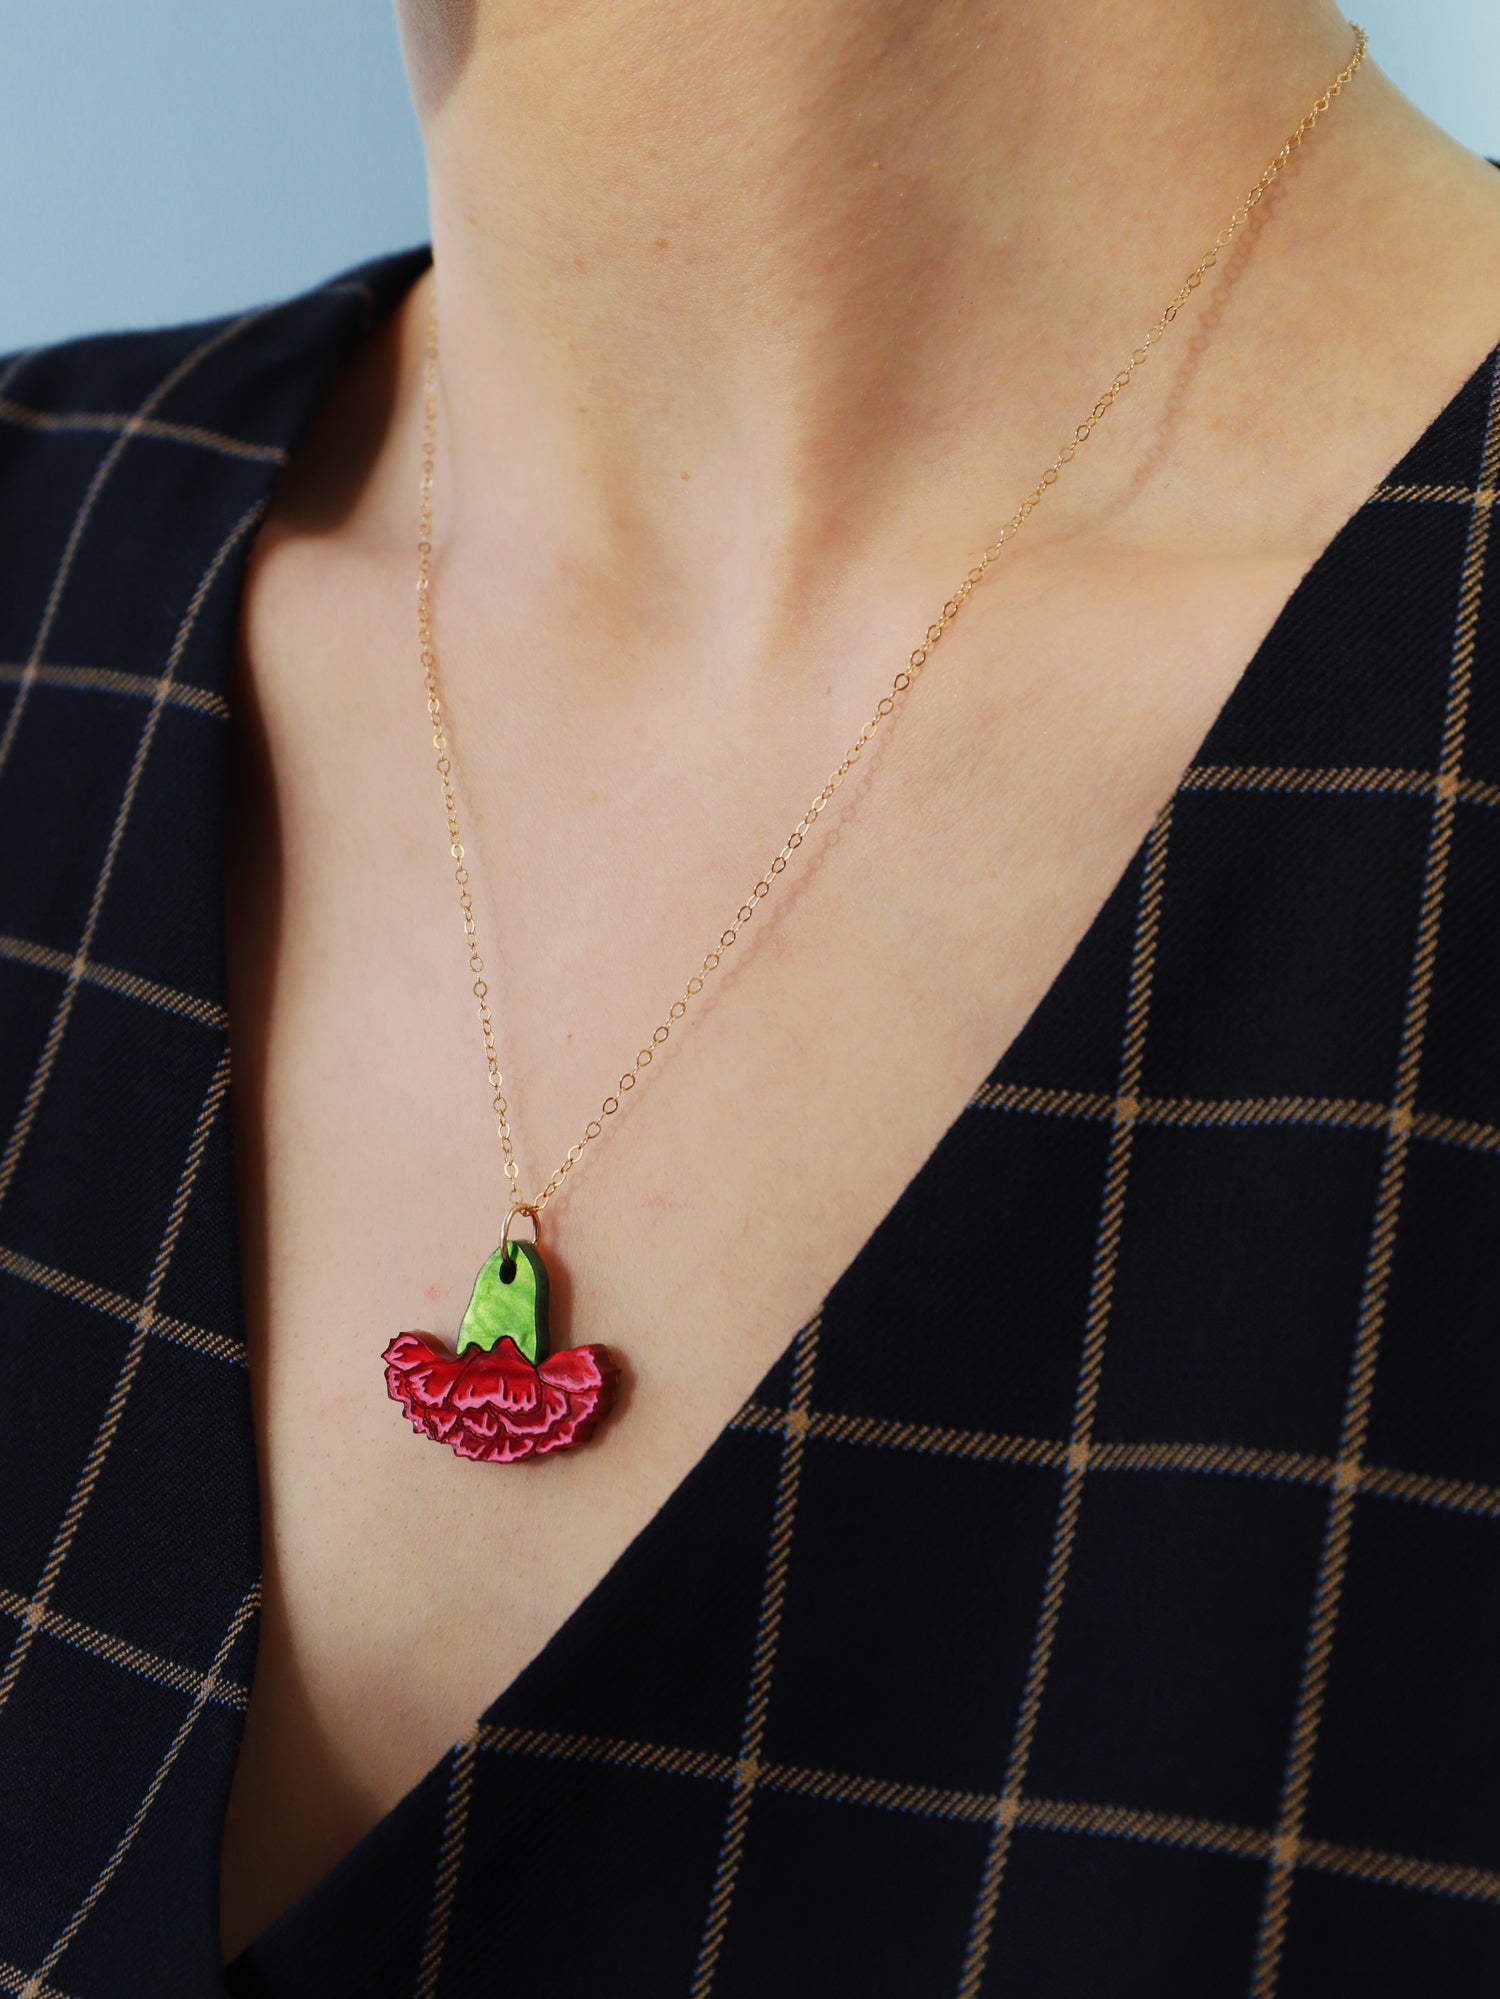 Carnation Necklace in Red/Pink